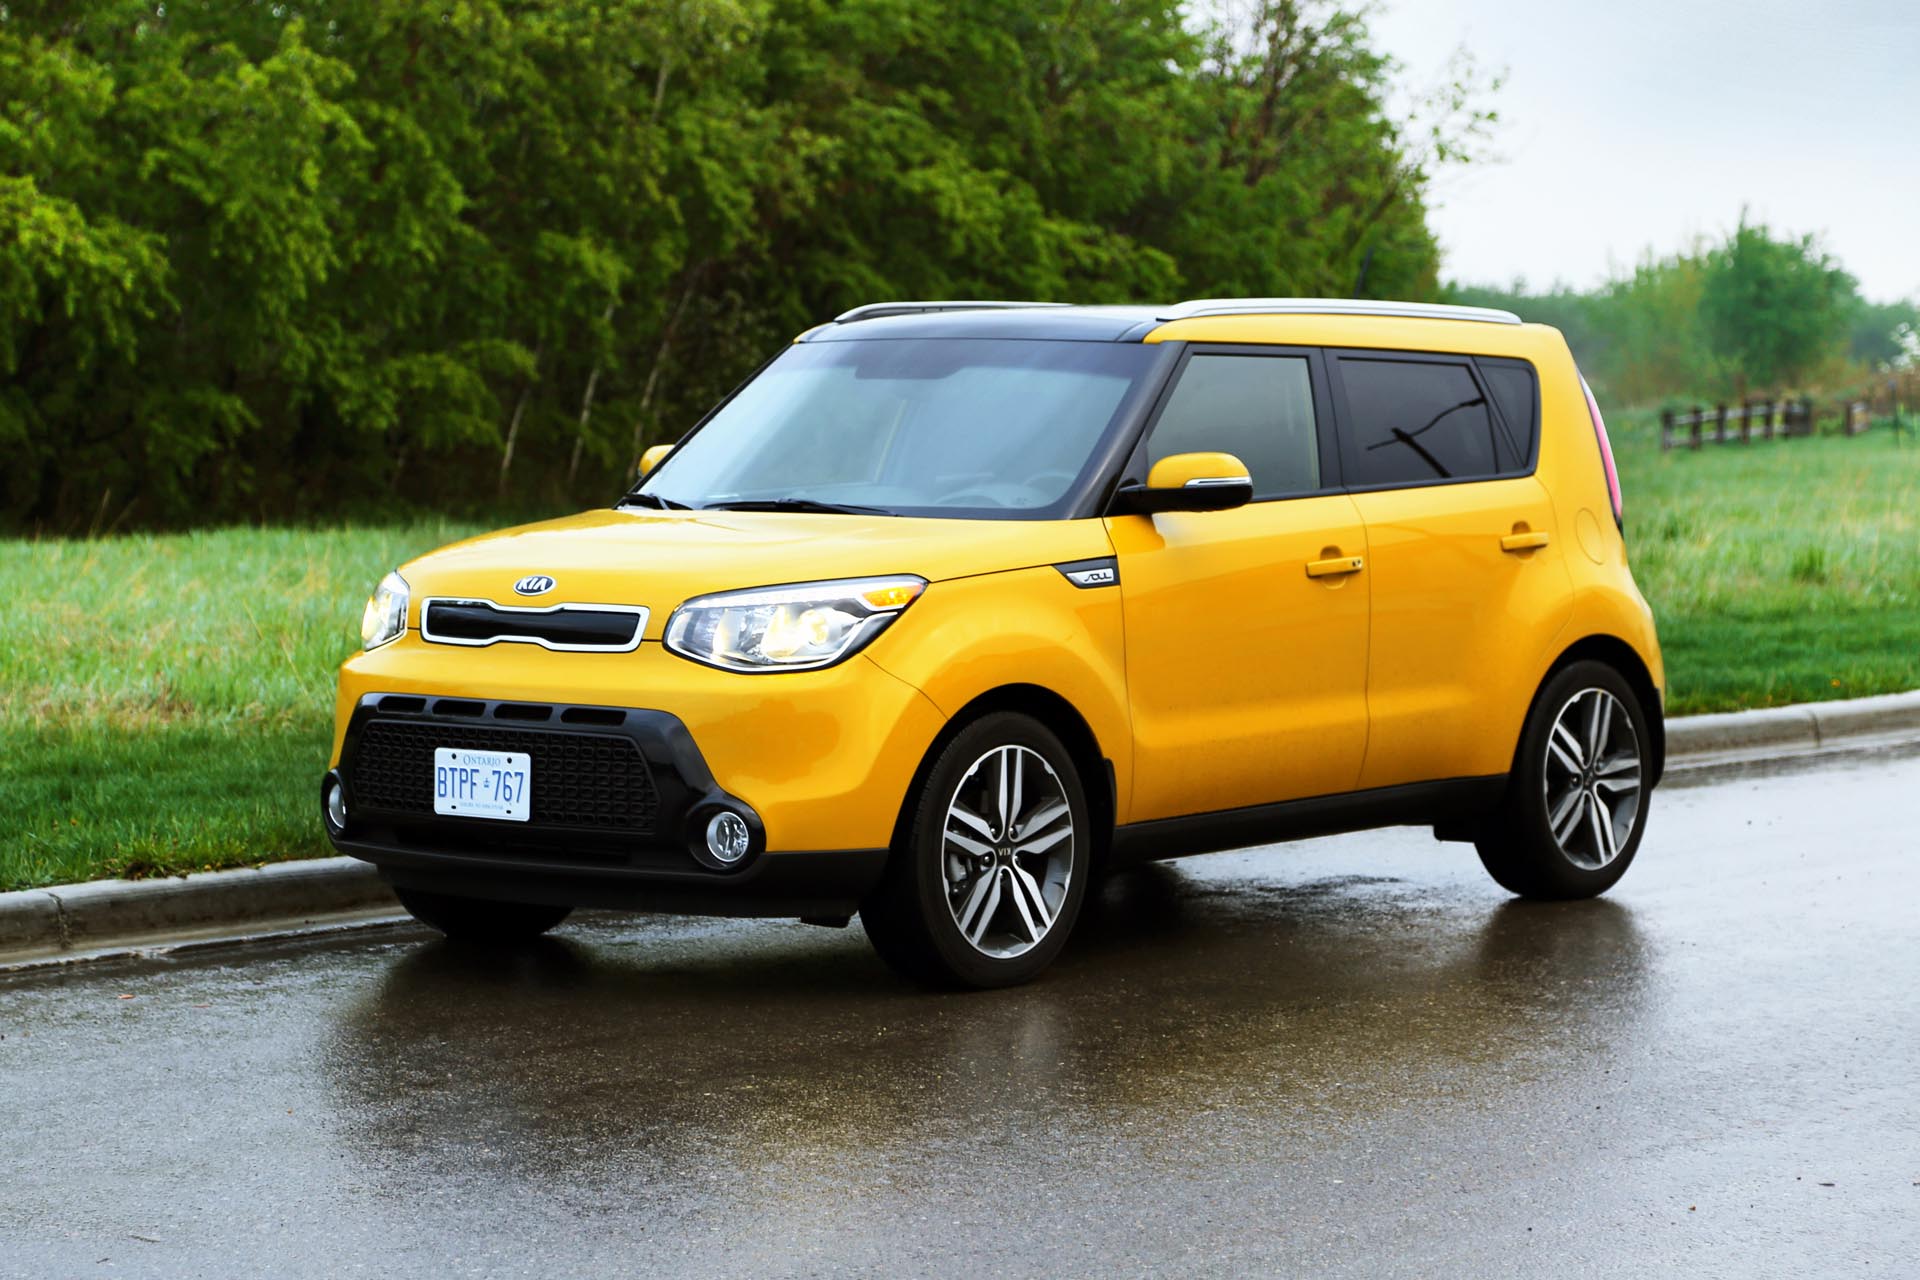 Yes, the Kia Soul is attention-grabbing and maybe you don't want people to watch as you take your fourth attempt to parallel park in that slightly-too-small spot right outside where you need to be. But think of it this way: there's no way drivers changing lanes will miss you in their mirrors or over their shoulders. The boxy design also means that you have an unobstructed view in all directions from the driver's seat, even with the chunky rear pillars. While you'd never call the driving experience 